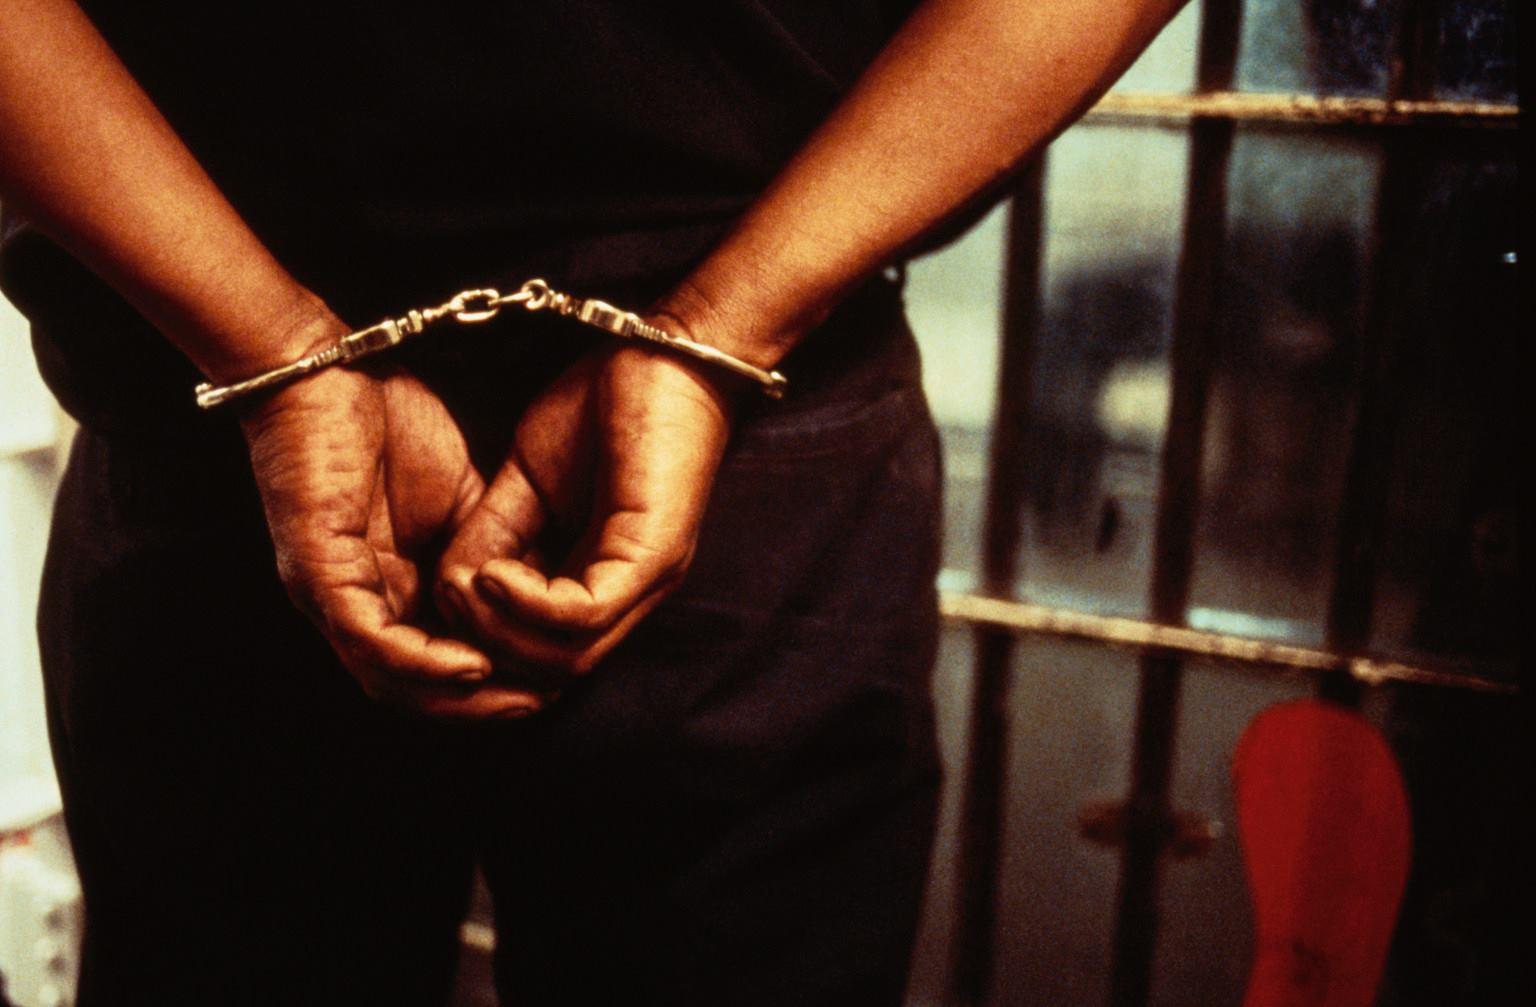 Househelp arrested for allegedly stealing US$7000